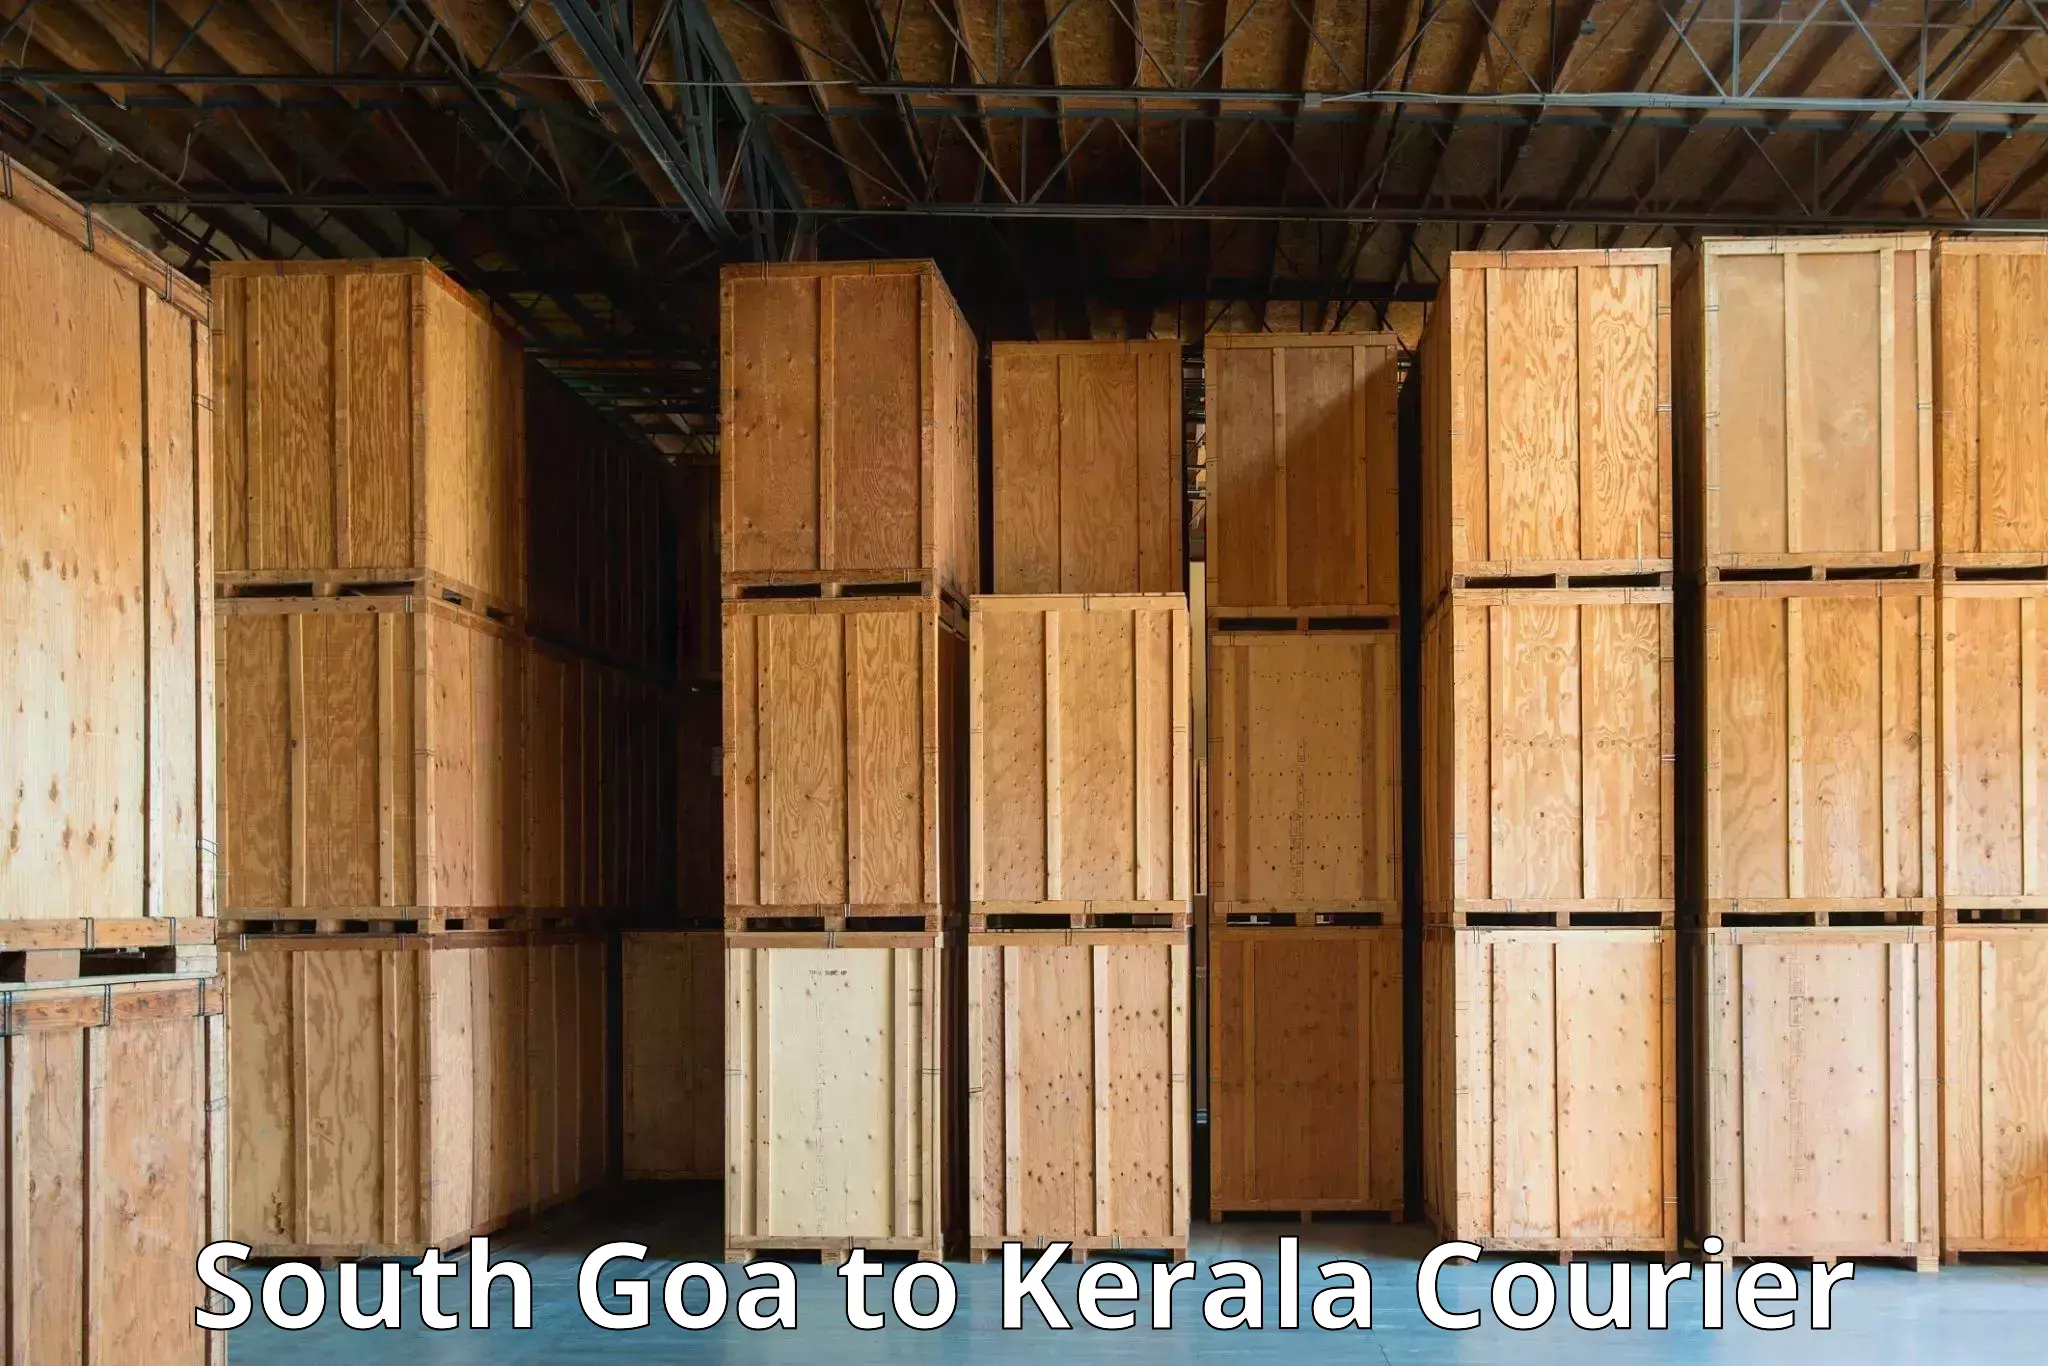 Subscription-based courier South Goa to Cochin Port Kochi